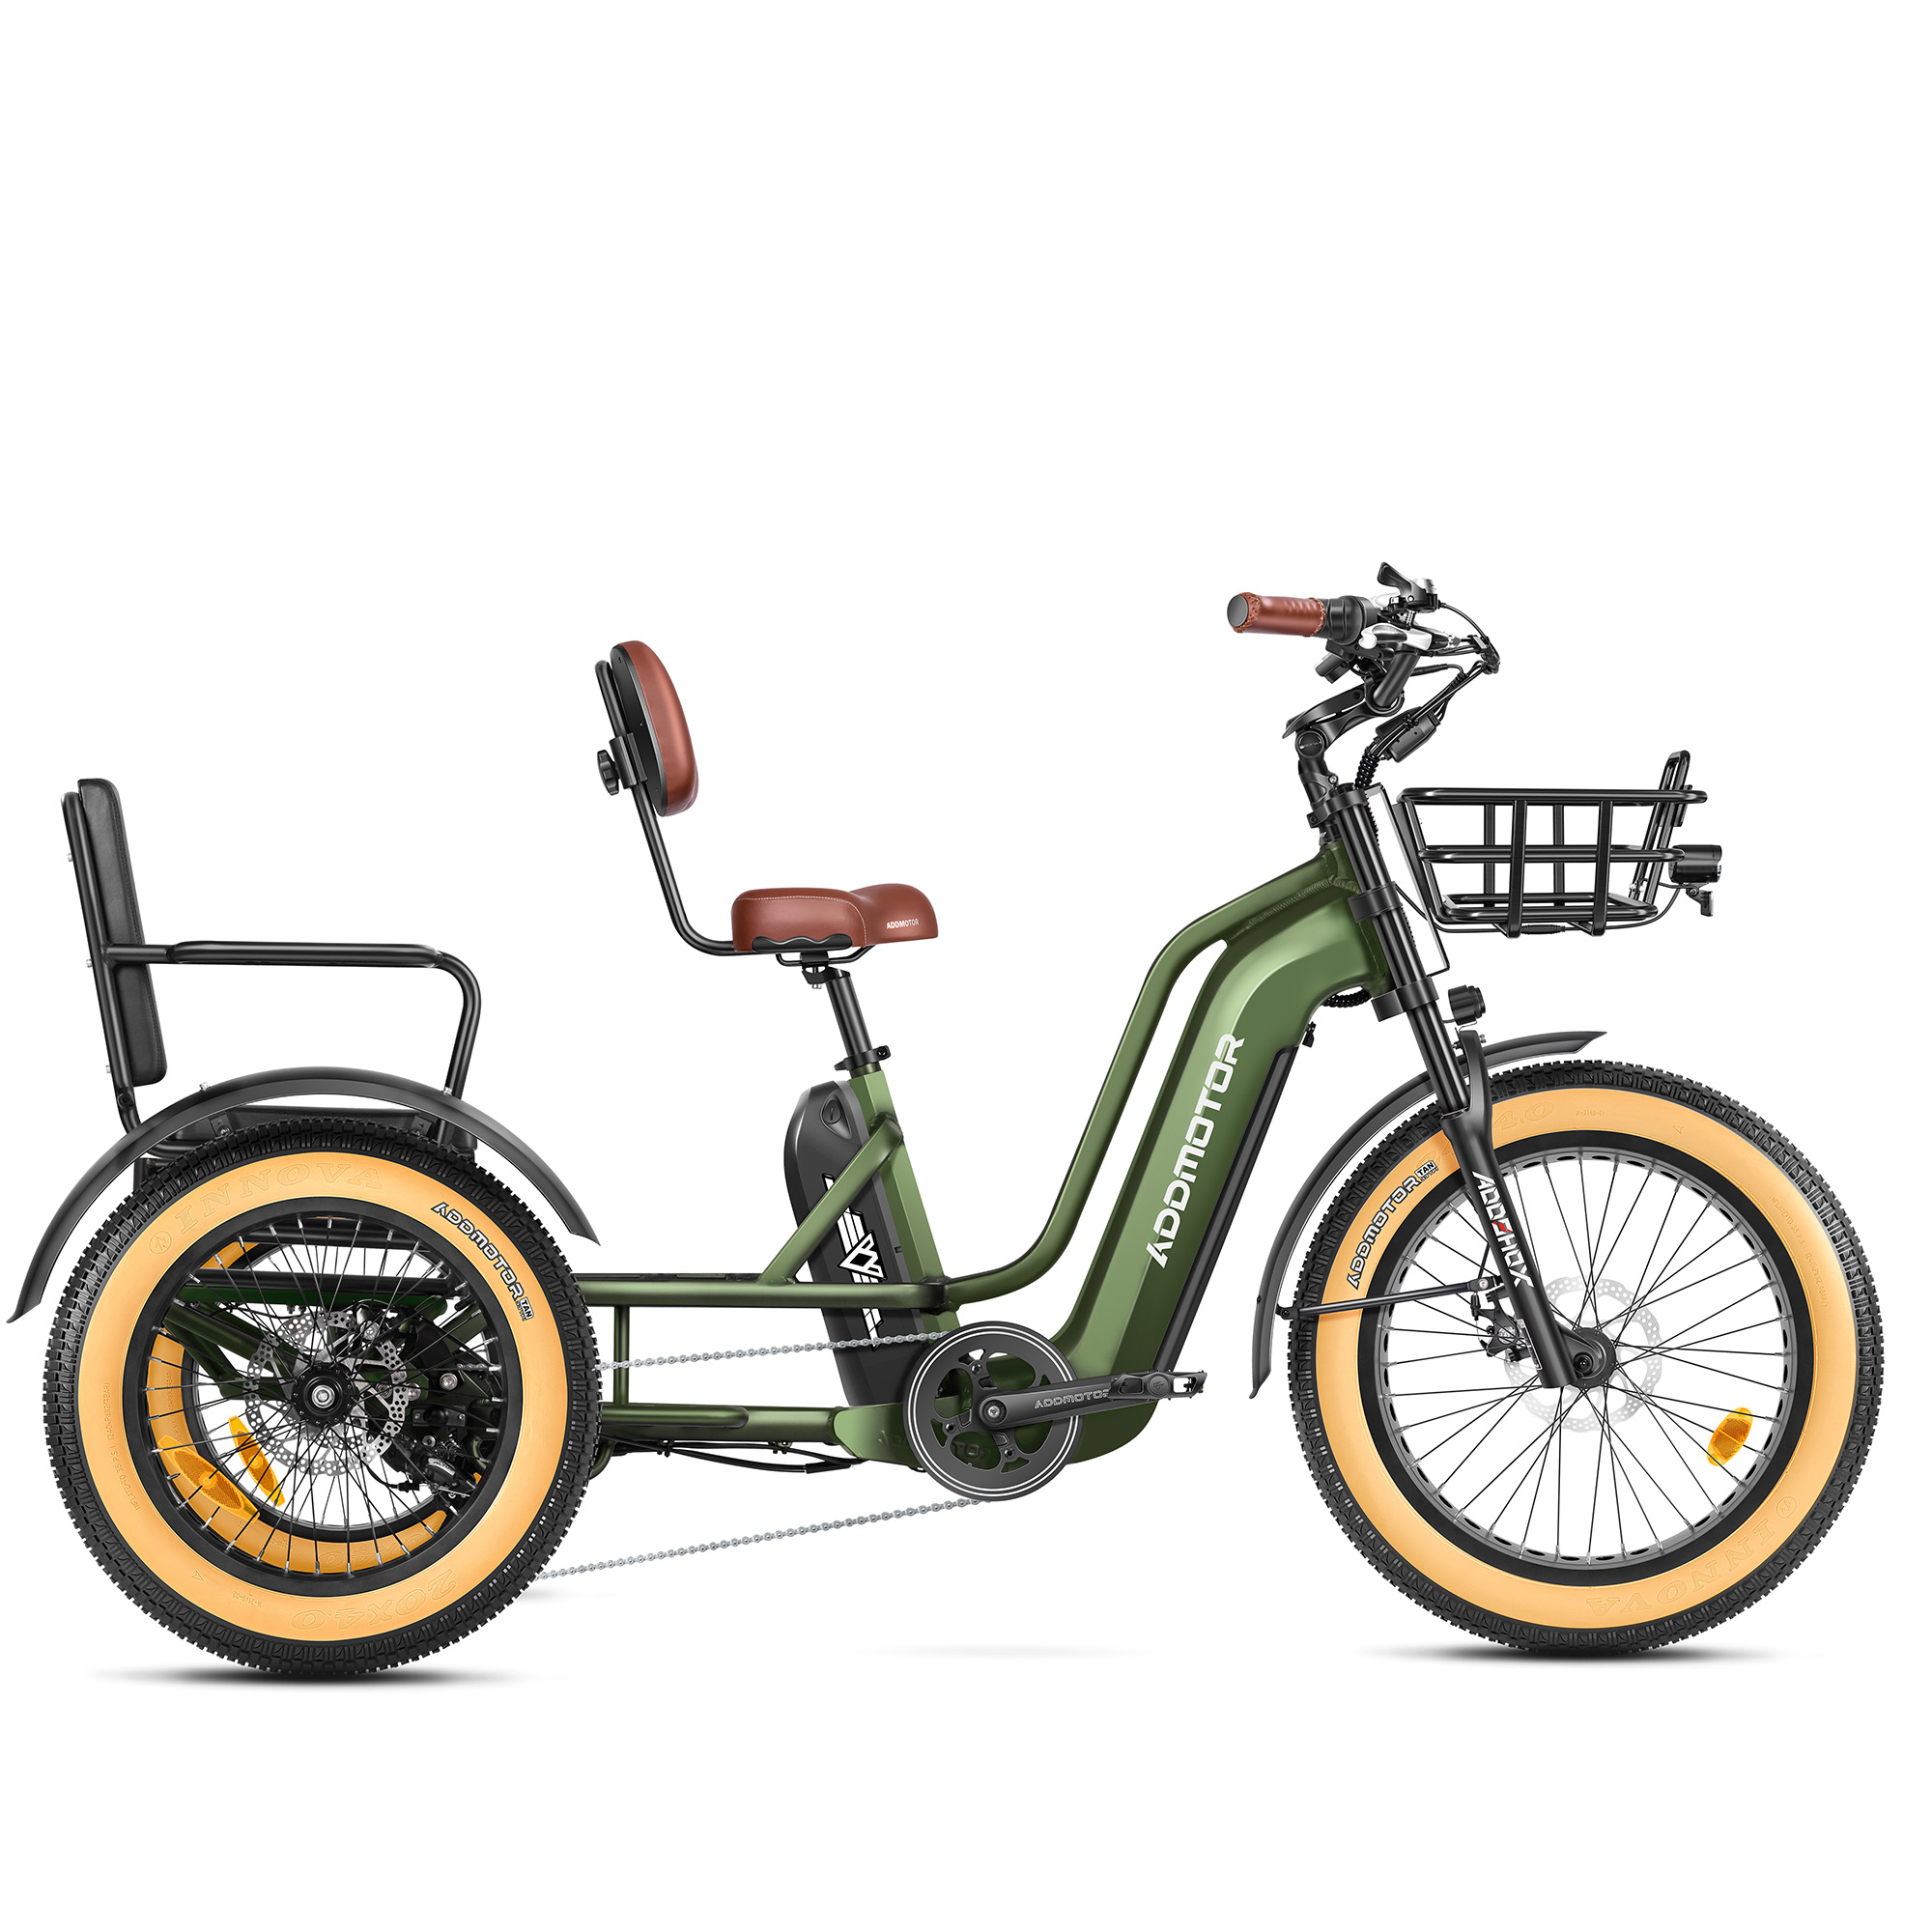 Addmotor Greattan L Dual-Battery Electric Trike with Passenger Seat | Fat Tire 750W Built-in Battery Design Electric Tricycle | Army Green